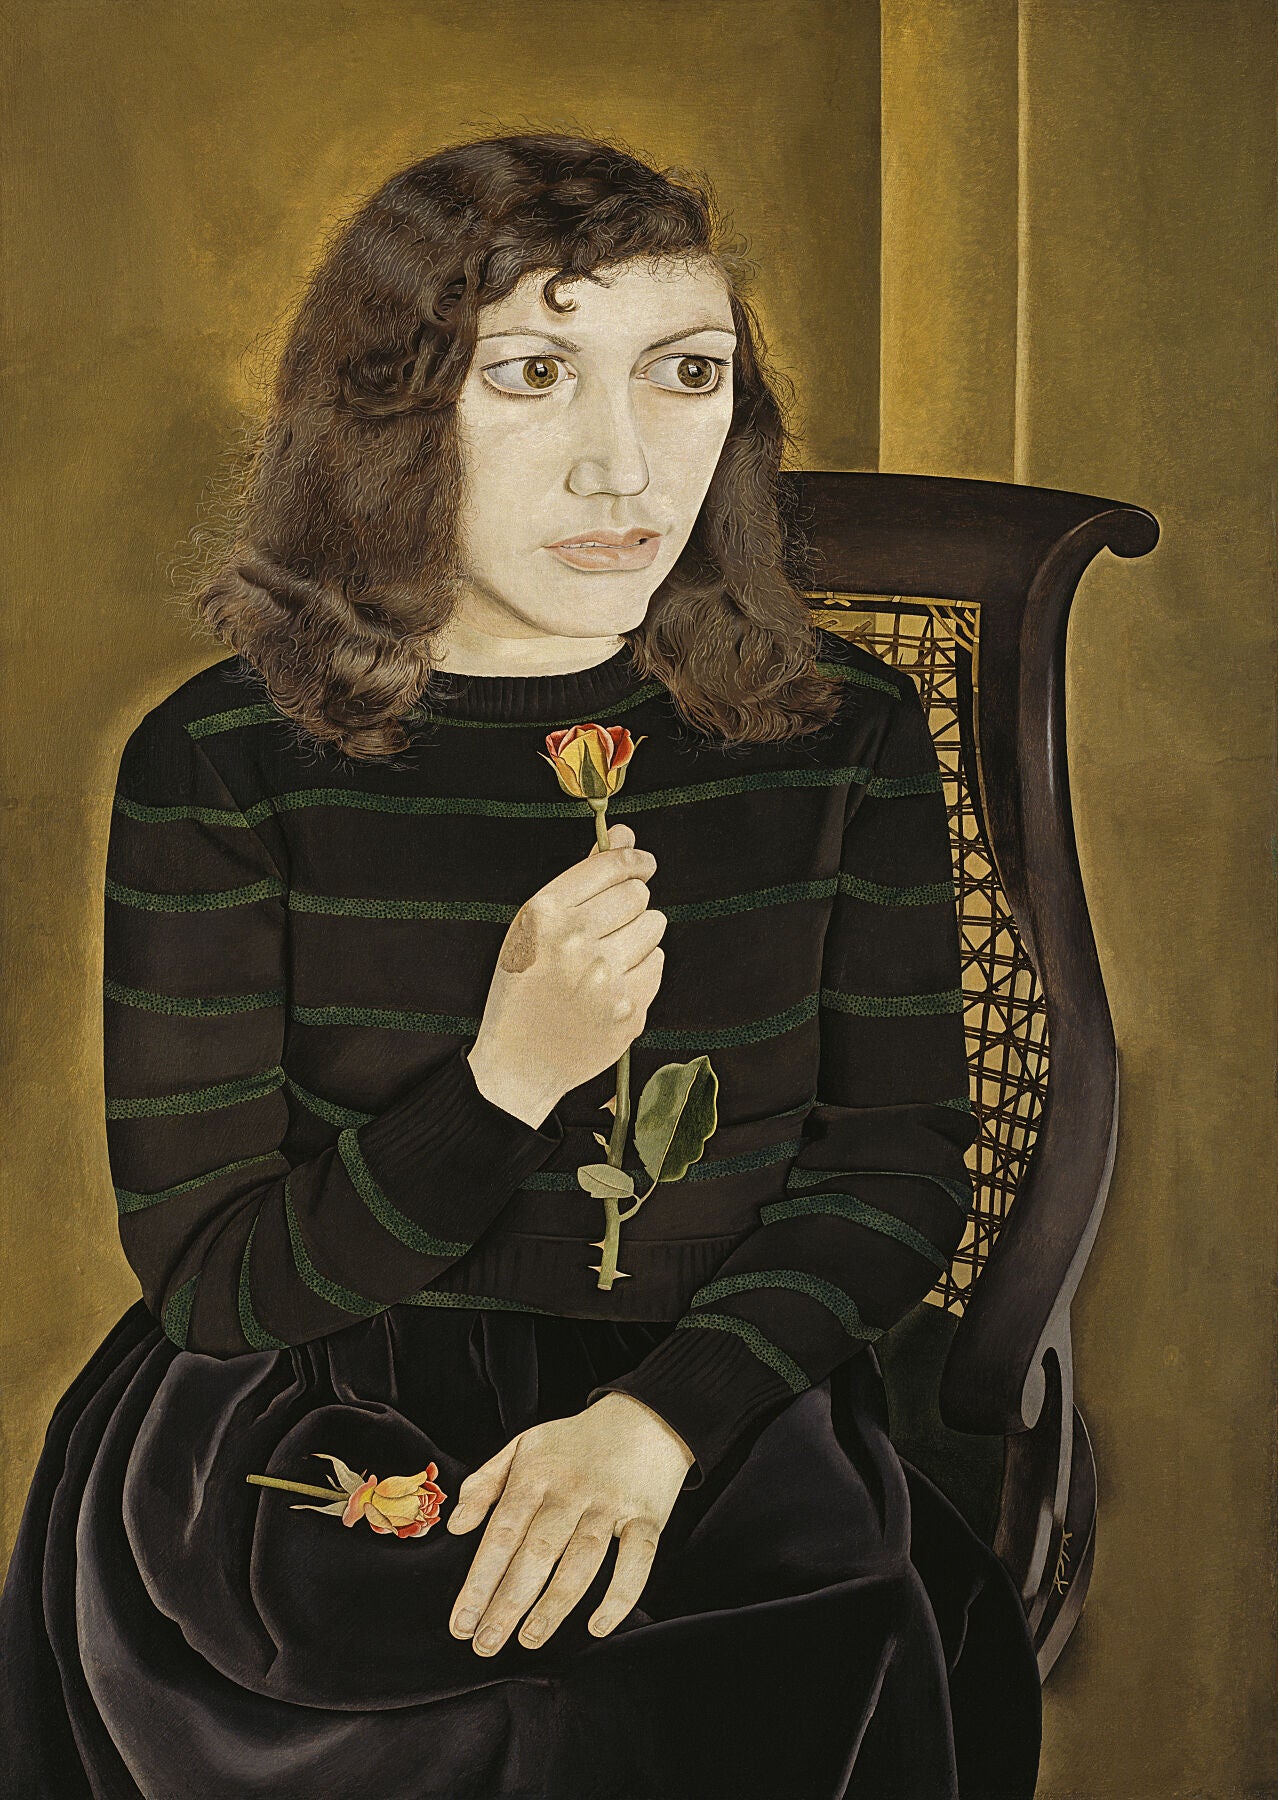 Girl with Roses, 1947-8 - Lucian Freud by  Bridgeman Editions